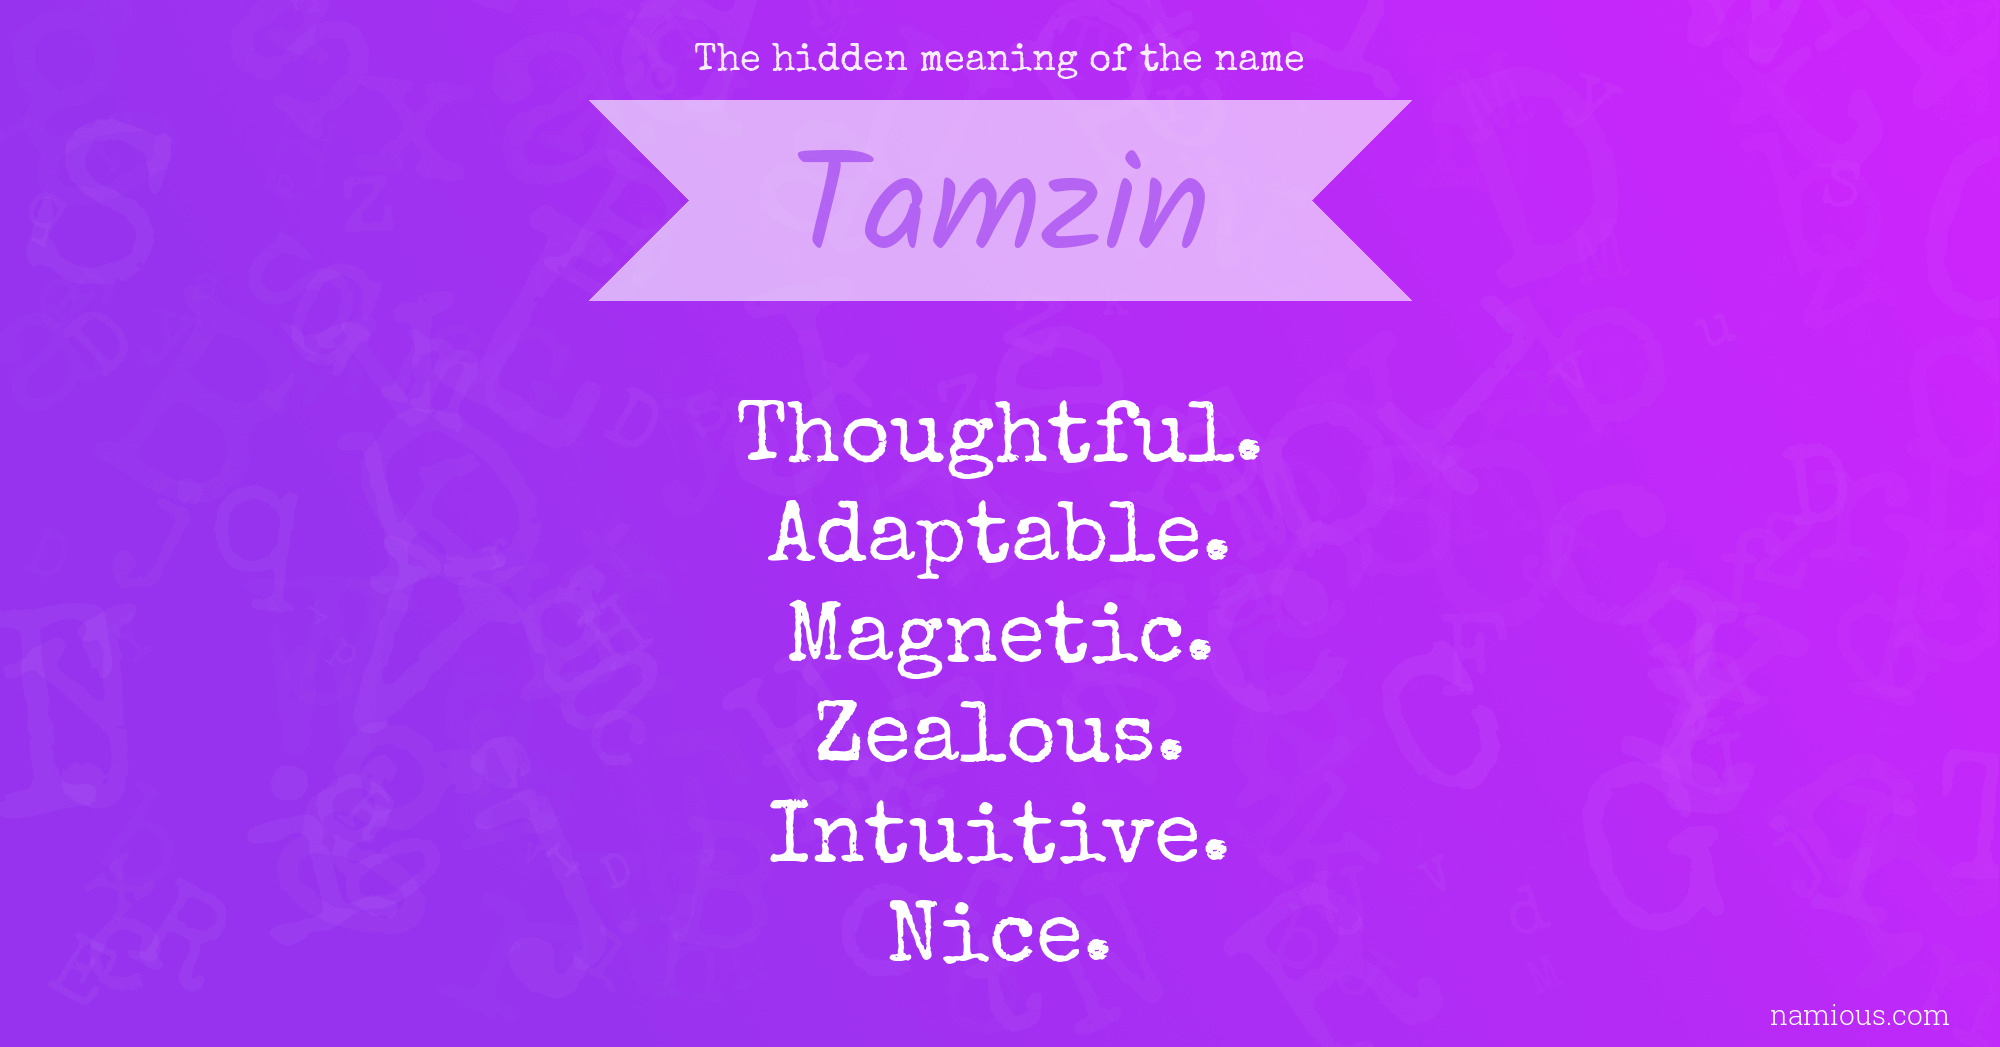 The hidden meaning of the name Tamzin